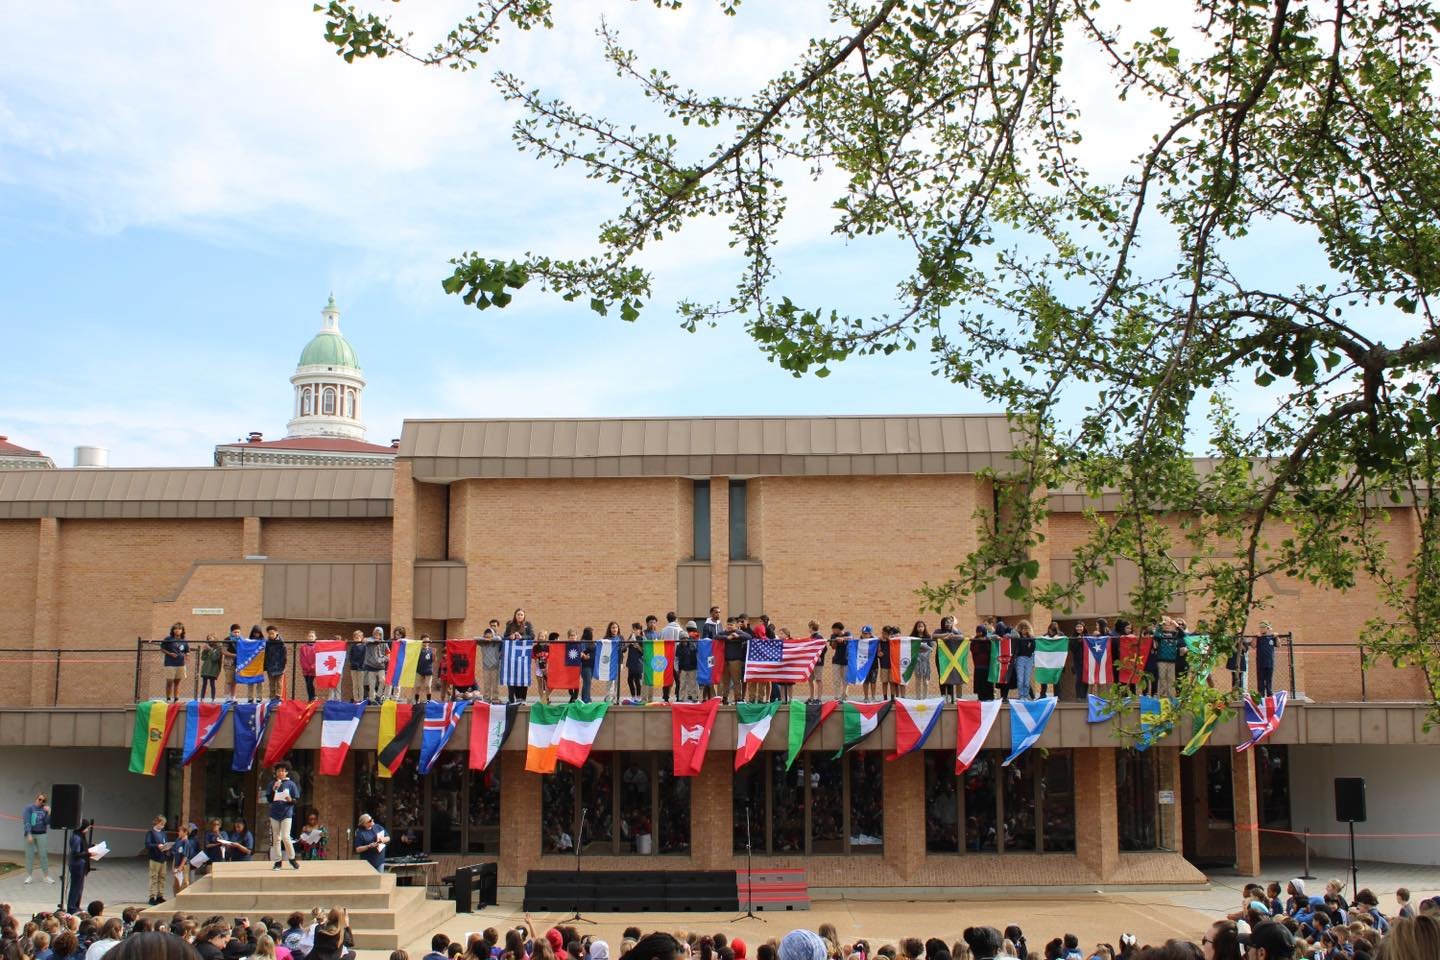 HAPPY MULTICULTURAL FAIR DAY! 
Today we celebrate our kids and come together to celebrate their cultures 💙

Each flag hanging from our banister represents the different counties our kids are from! 
We are a Kaleidoscope of Cultures 🌎🌍🌏

Enjoy the